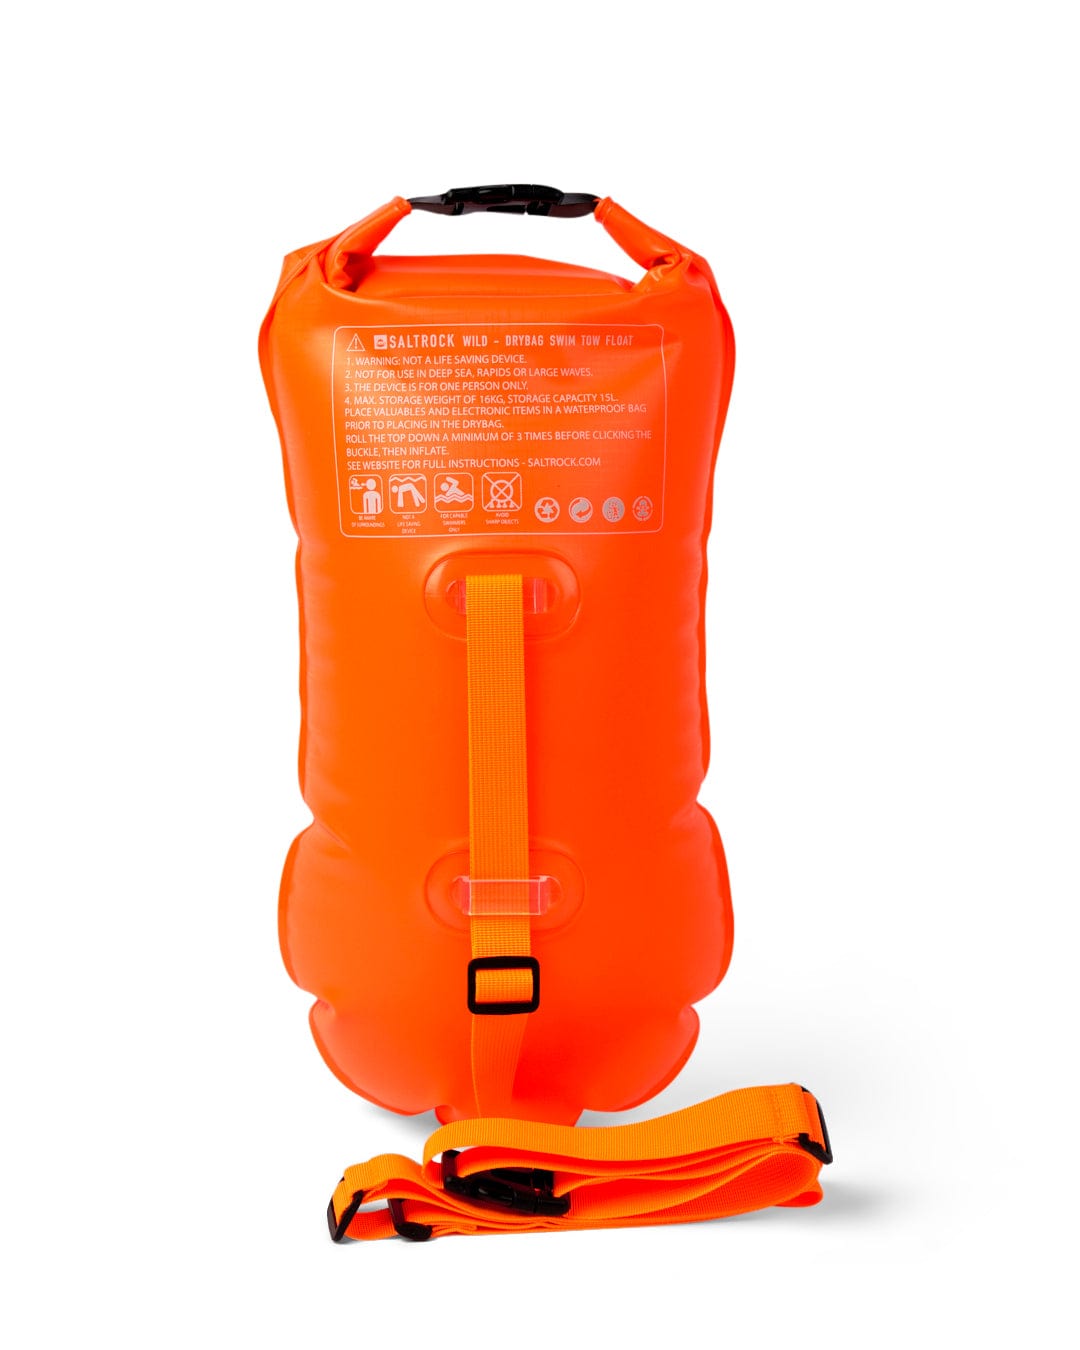 Bright orange Wild - Drybag/Inflatable Swim Tow Float designed for cold water swimming with shoulder strap isolated on white background.